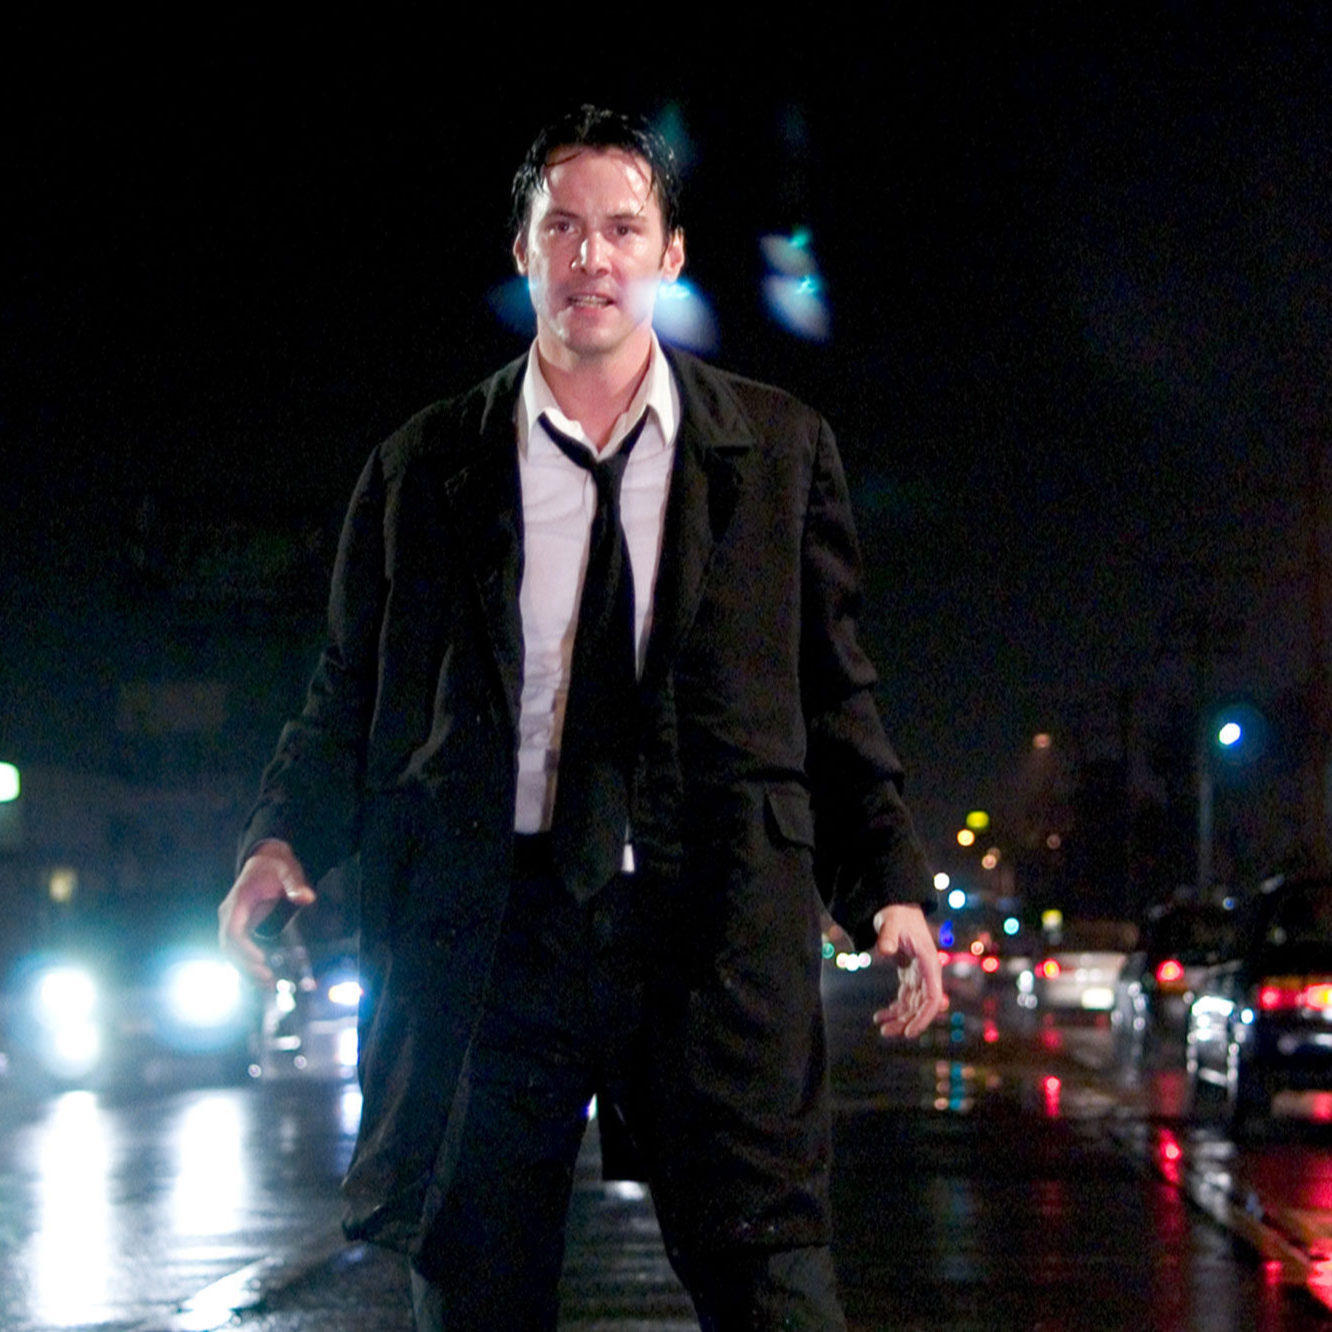 Entertainment Weekly - After 17 years, Keanu Reeves will reprise his role as John Constantine for a